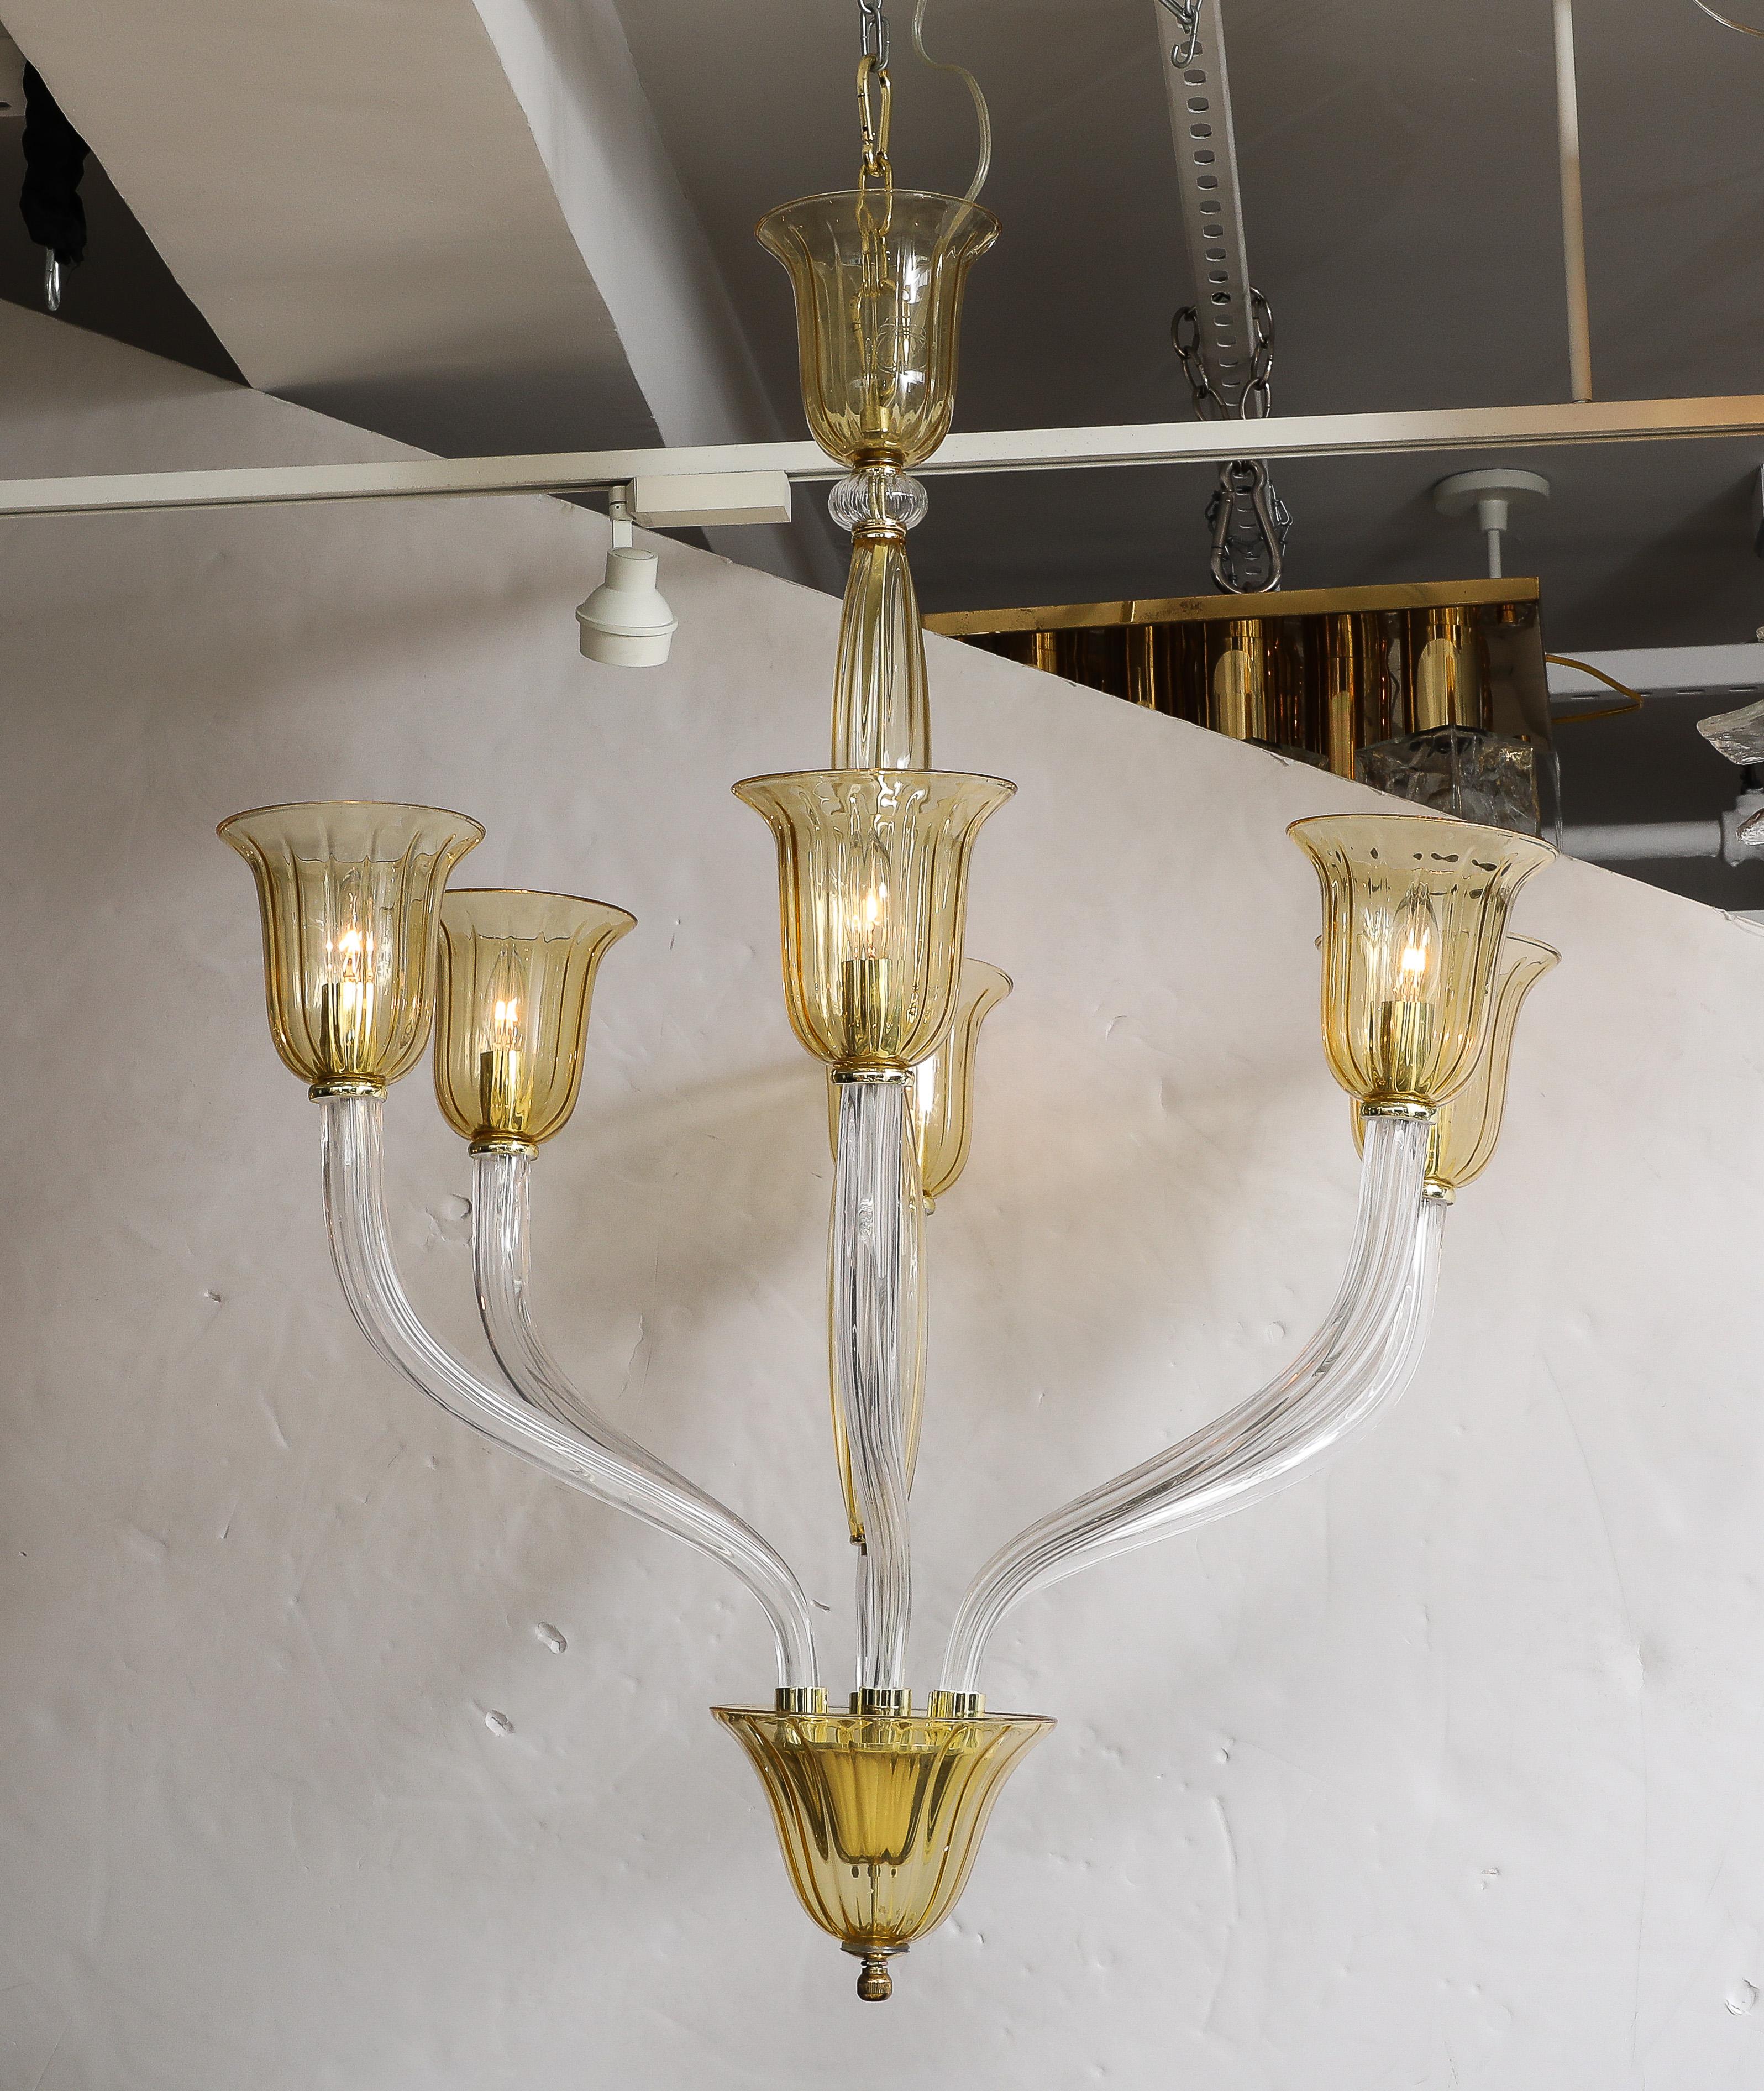 Hand Blown Murano art glass 6 arm chandelier with clear fluted arms and amber/honey colored glass accents. Wired for use in the USA, uses15-40W candelabra type bulbs. 